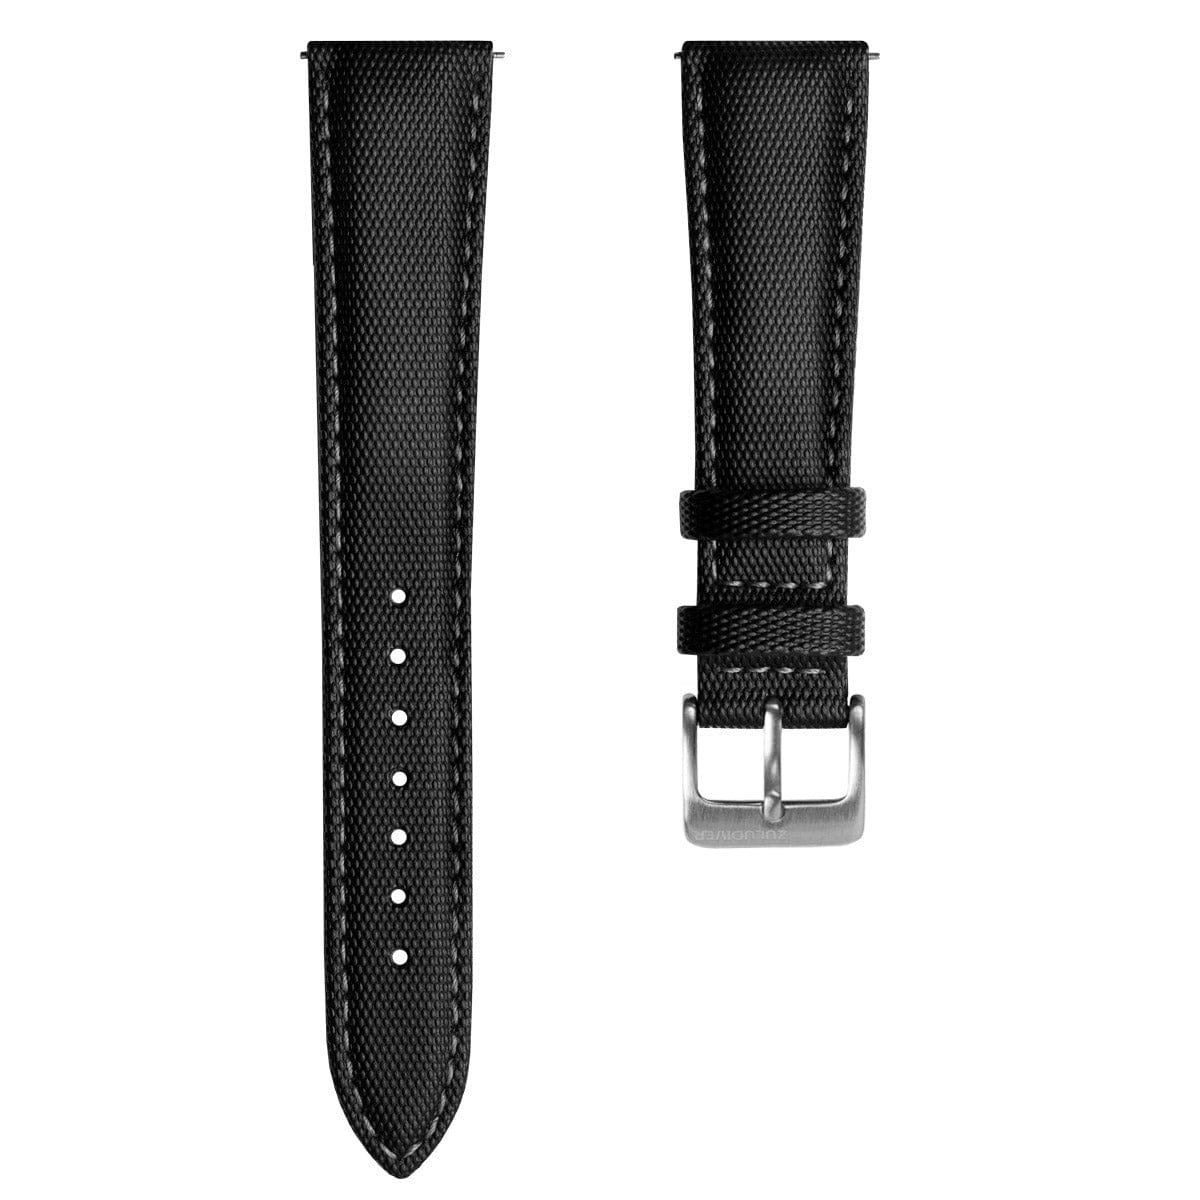 ZULUDIVER Mayday Sailcloth Padded Divers Watch Strap - Grey Stitching